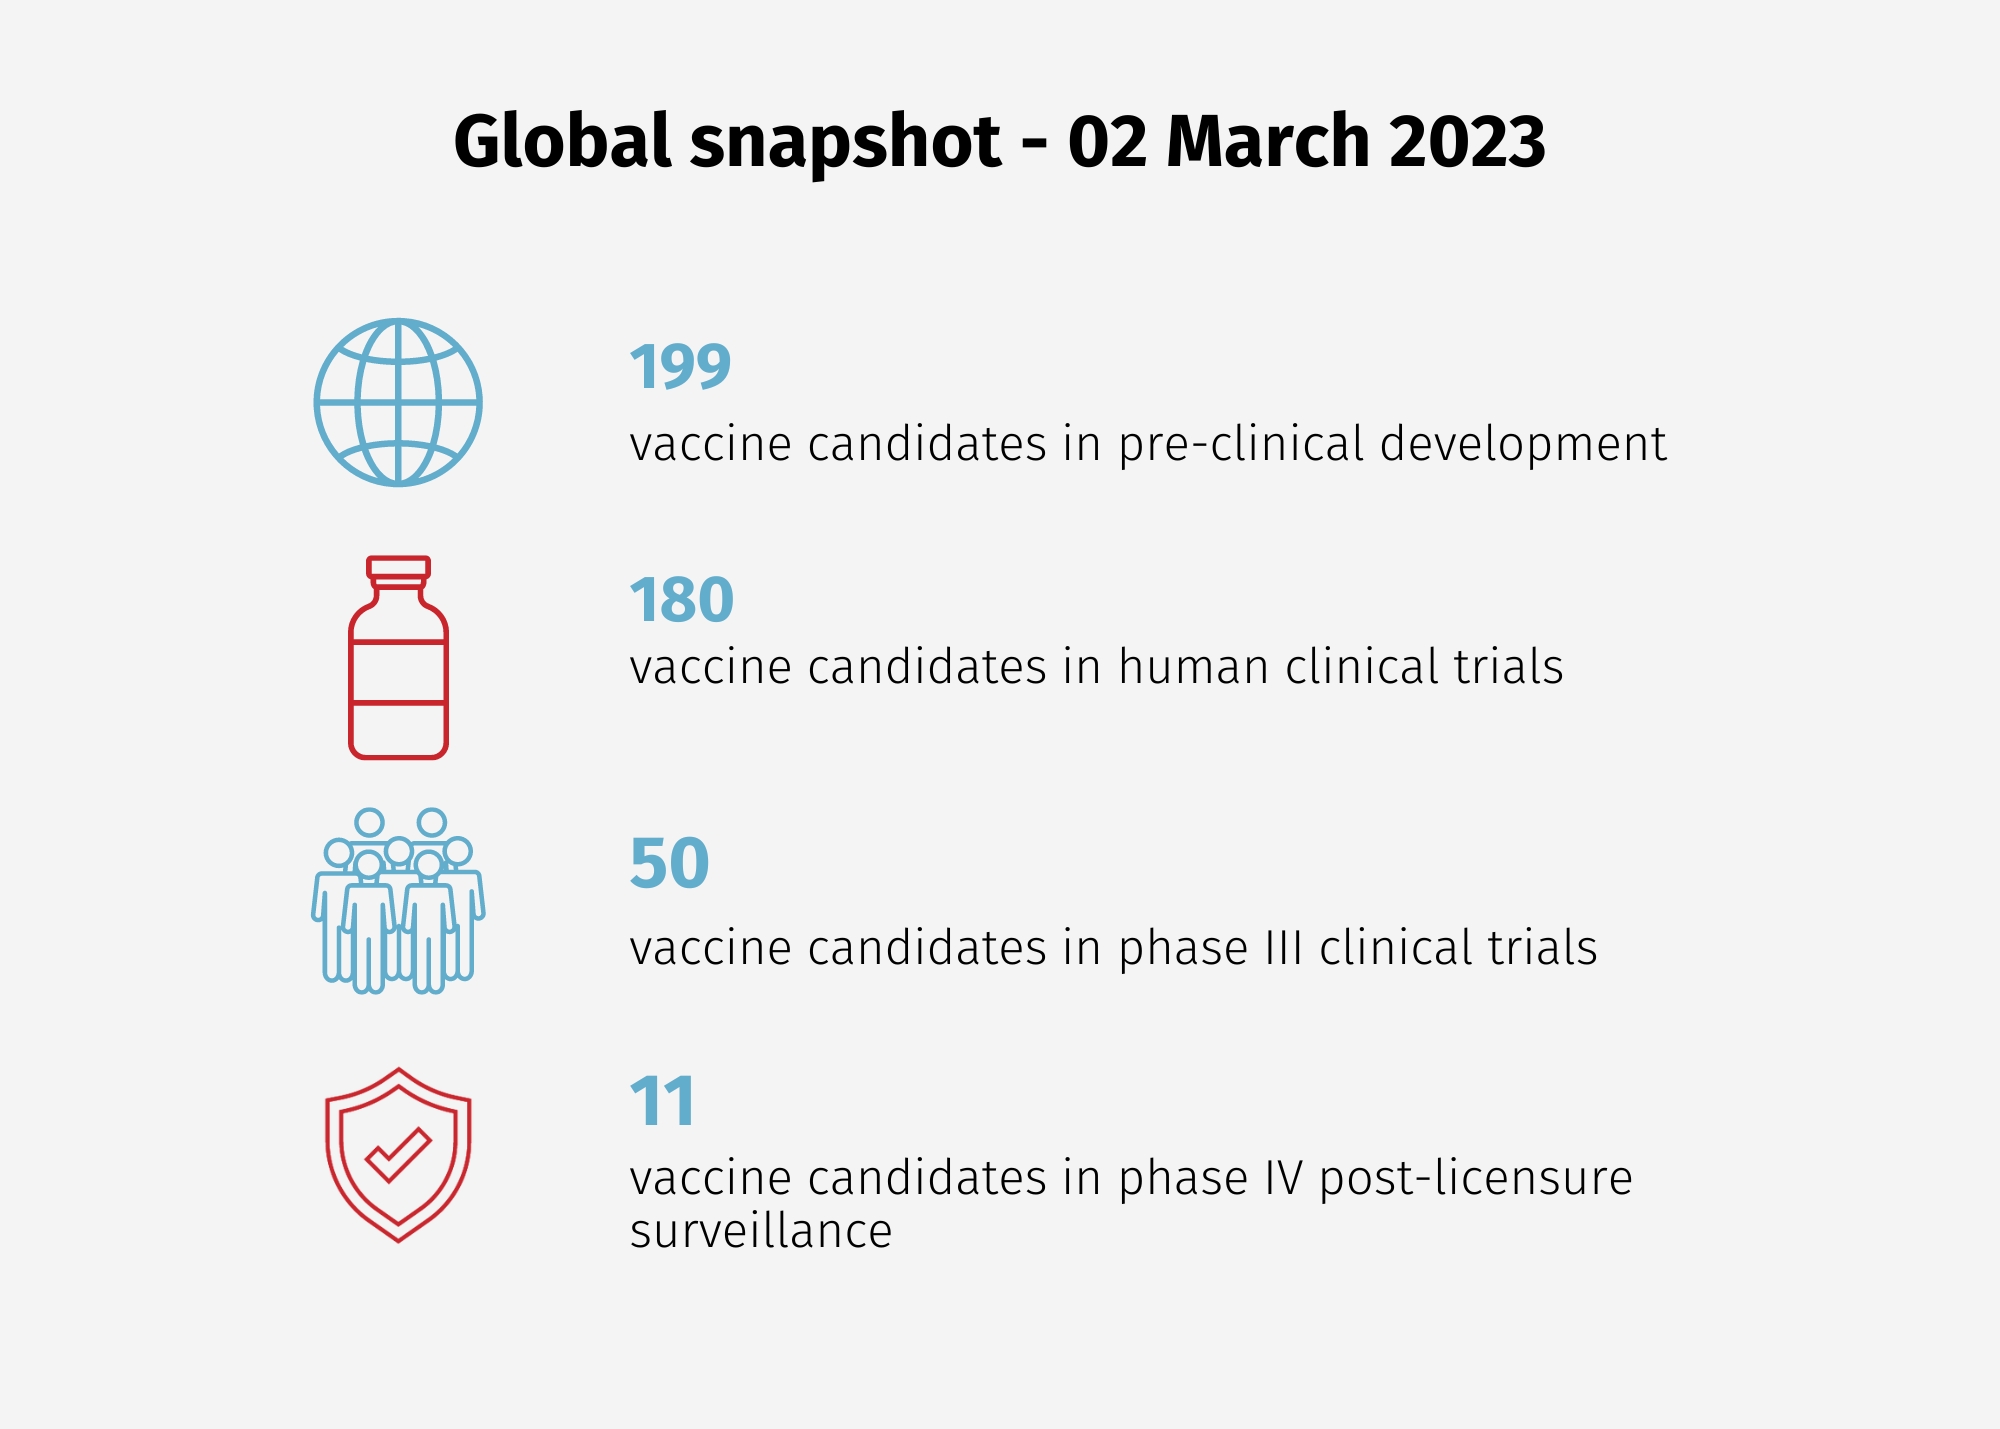 Global snapshot - 02 March 2023. 199 vaccines in pre-clinical development 180 vaccine candidates in human clinical trials 50 vaccine candidates in phase III clinical trials 11 vaccine candidates in phase IV post-licensure surveillance